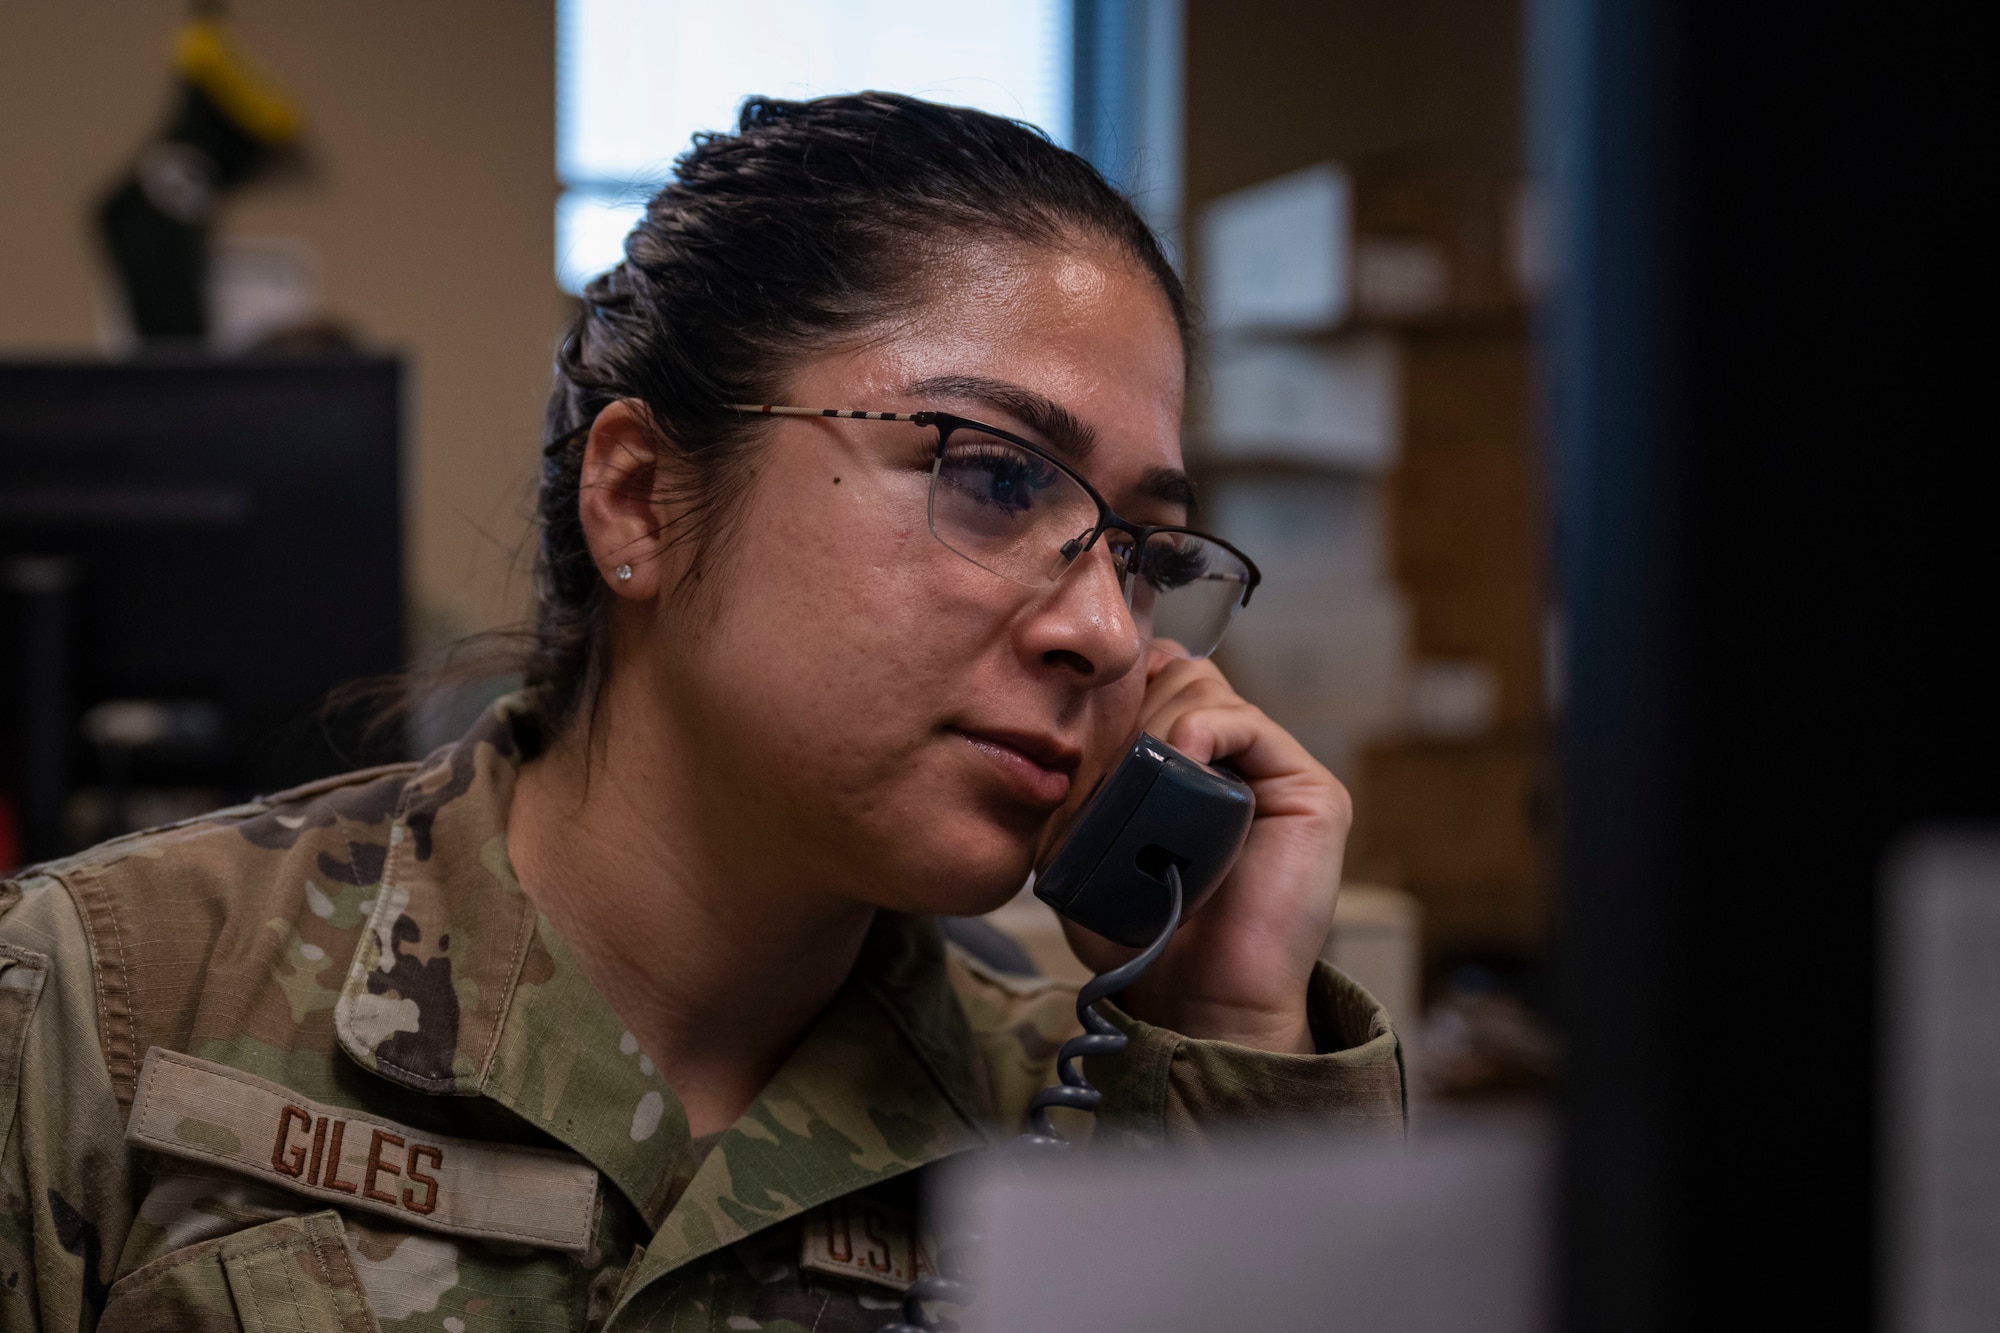 U.S. Airman 1st Class Diana Giles, 4th Fighter Wing judge advocate general corpsman, talks on the phone at Seymour Johnson Air Force Base, North Carolina, June 21, 2023. The 4th FW legal office is responsible for providing legal assistance to more than 25,000 retired and active-duty military members. (U.S. Air Force photo by Senior Airman David Lynn)